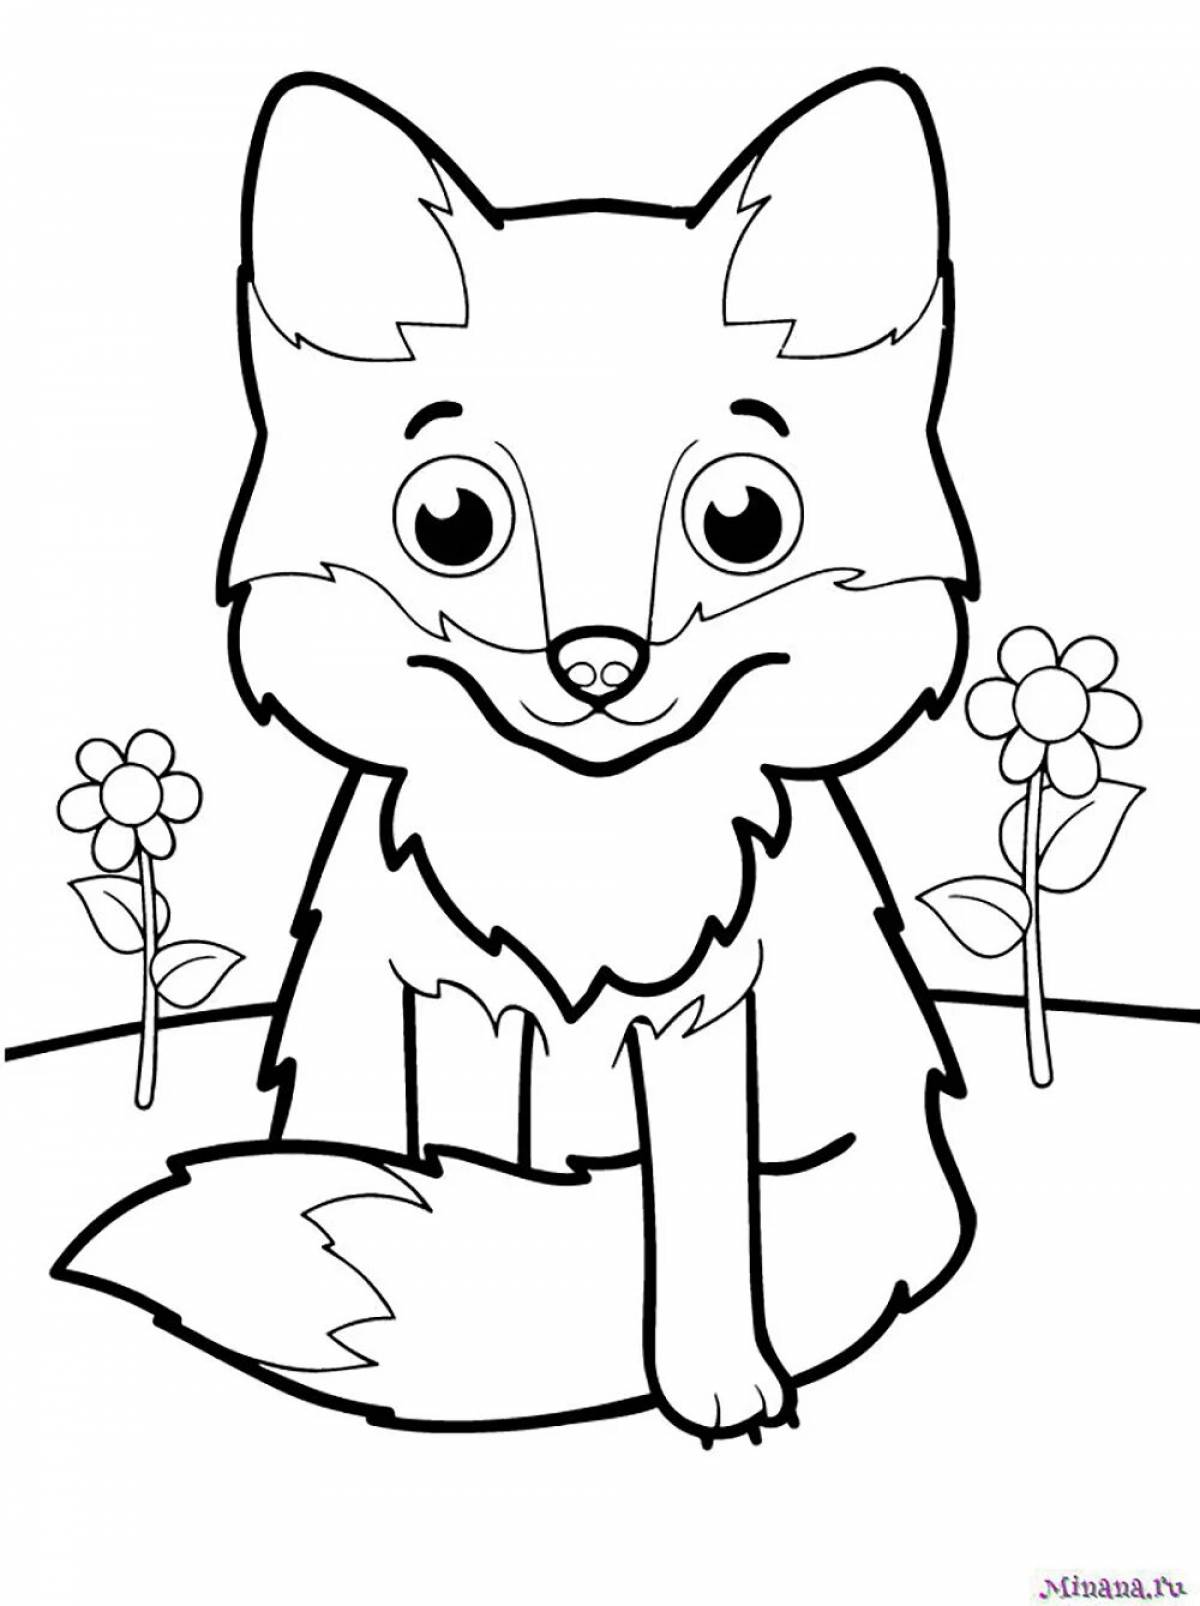 Coloring for kids playful fox